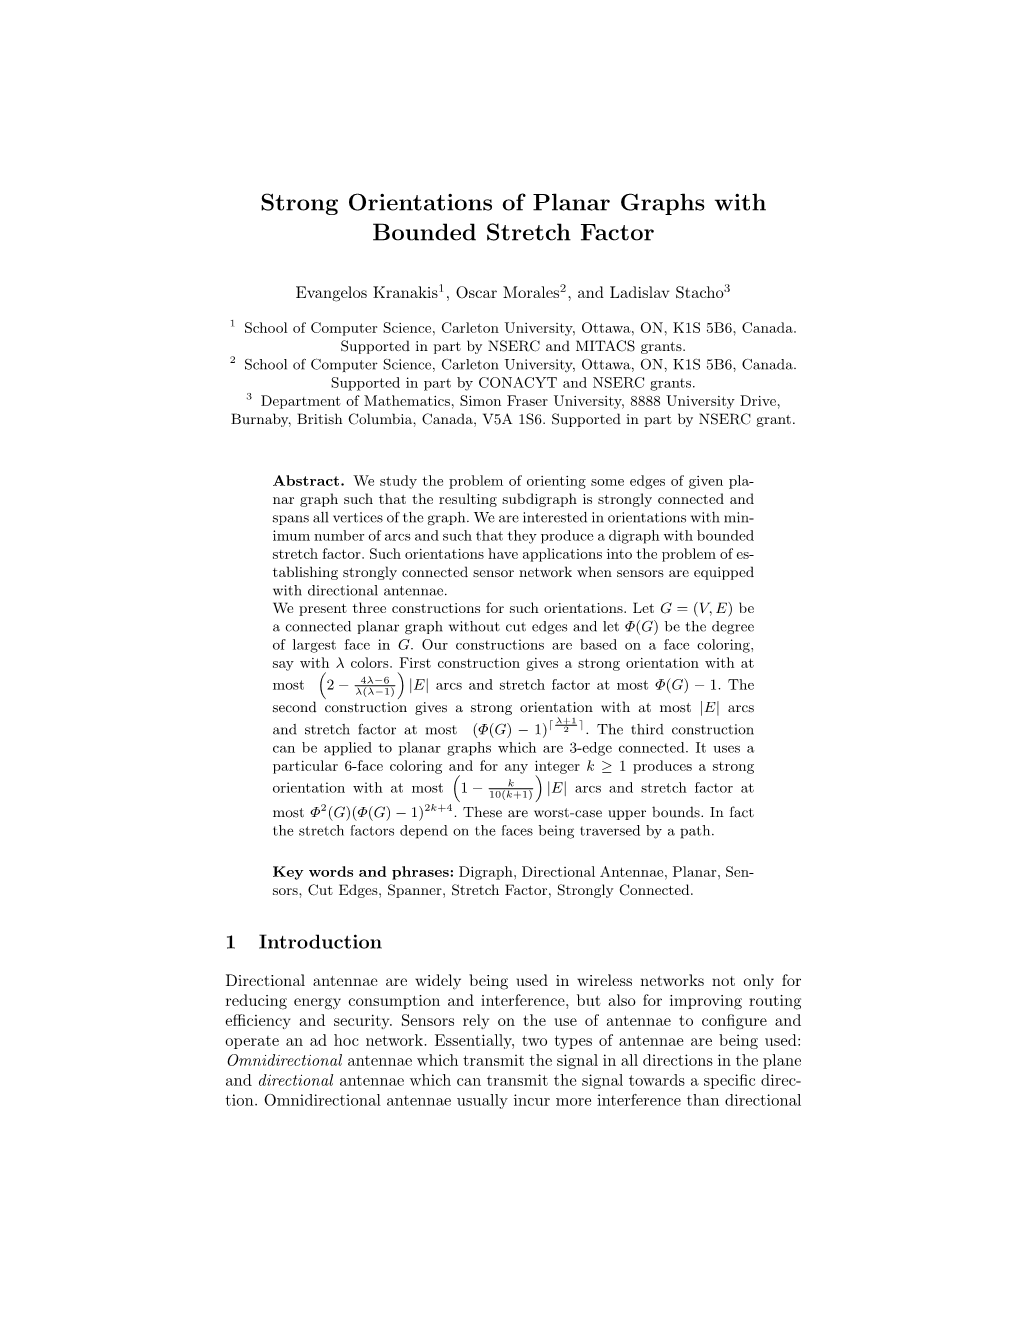 Strong Orientations of Planar Graphs with Bounded Stretch Factor